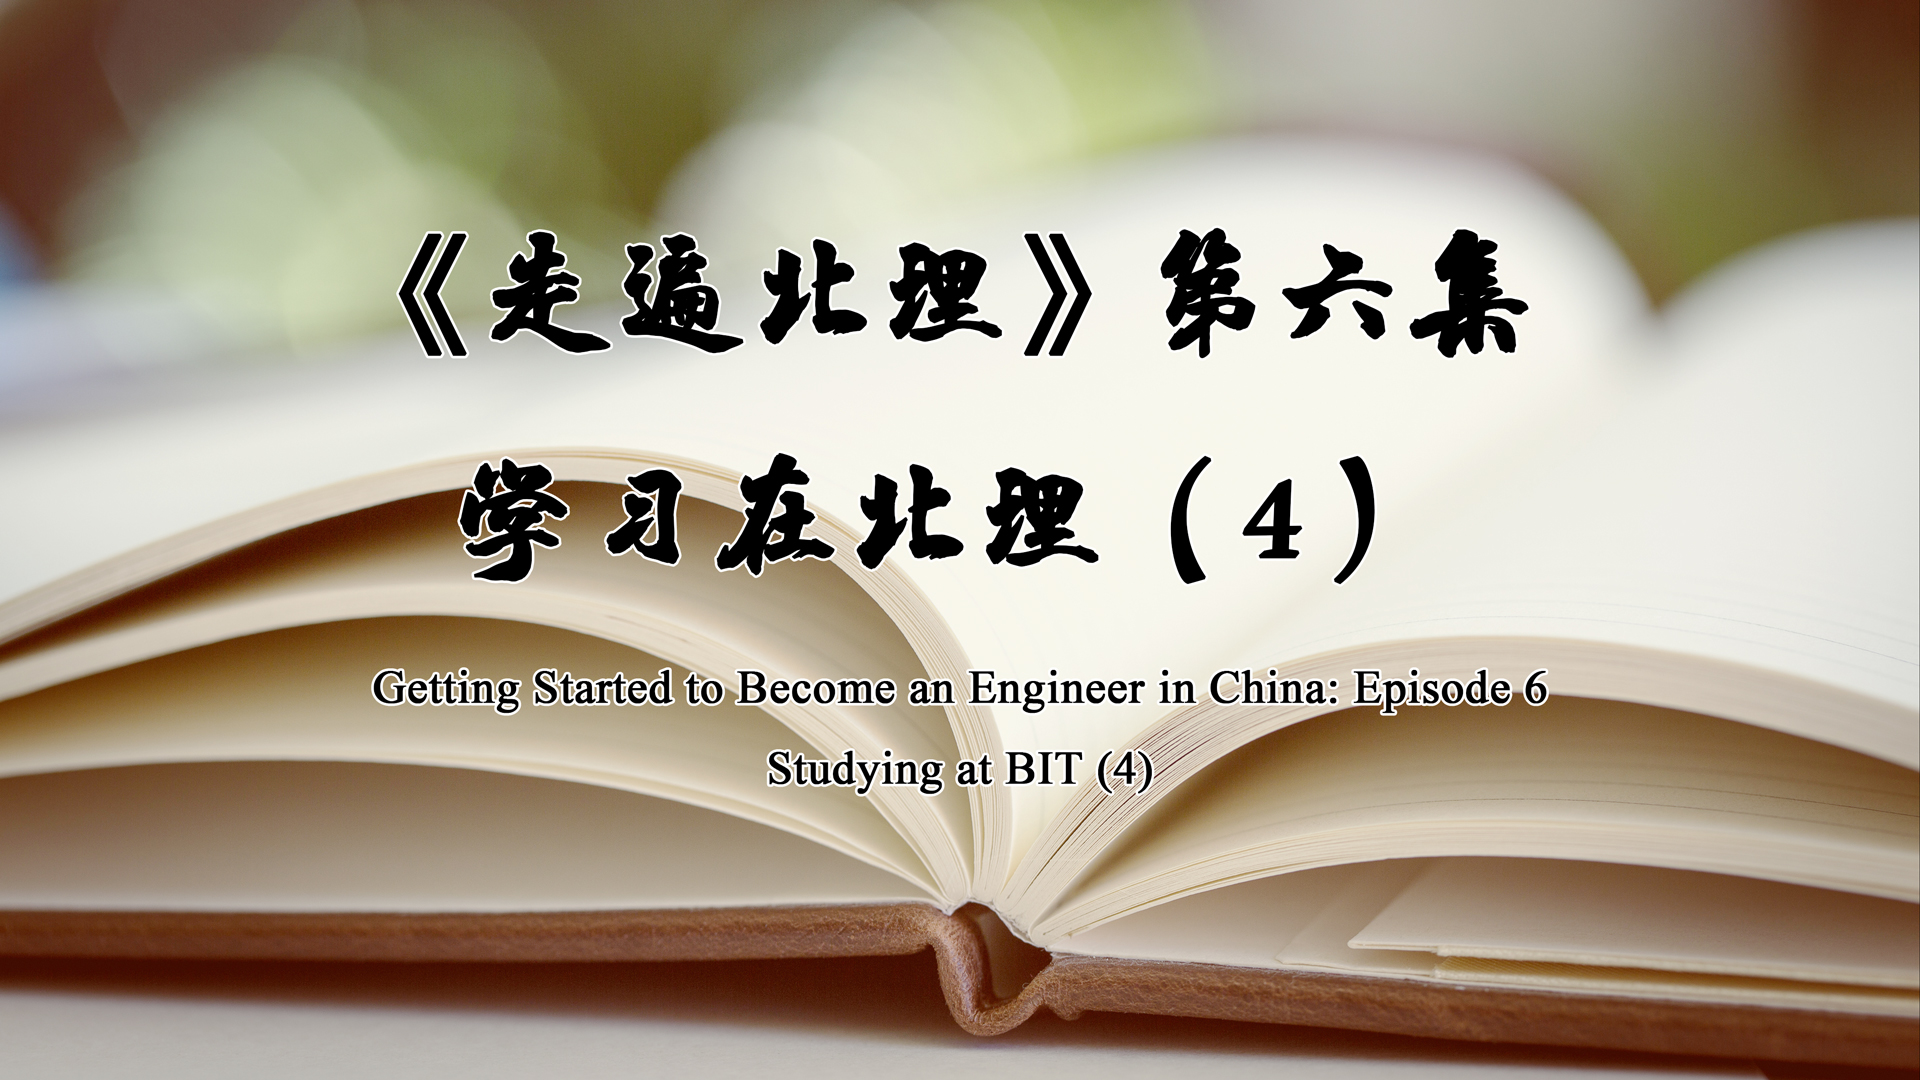 Getting started to become an engineer in China-Episode 6: Studying at BIT (4)